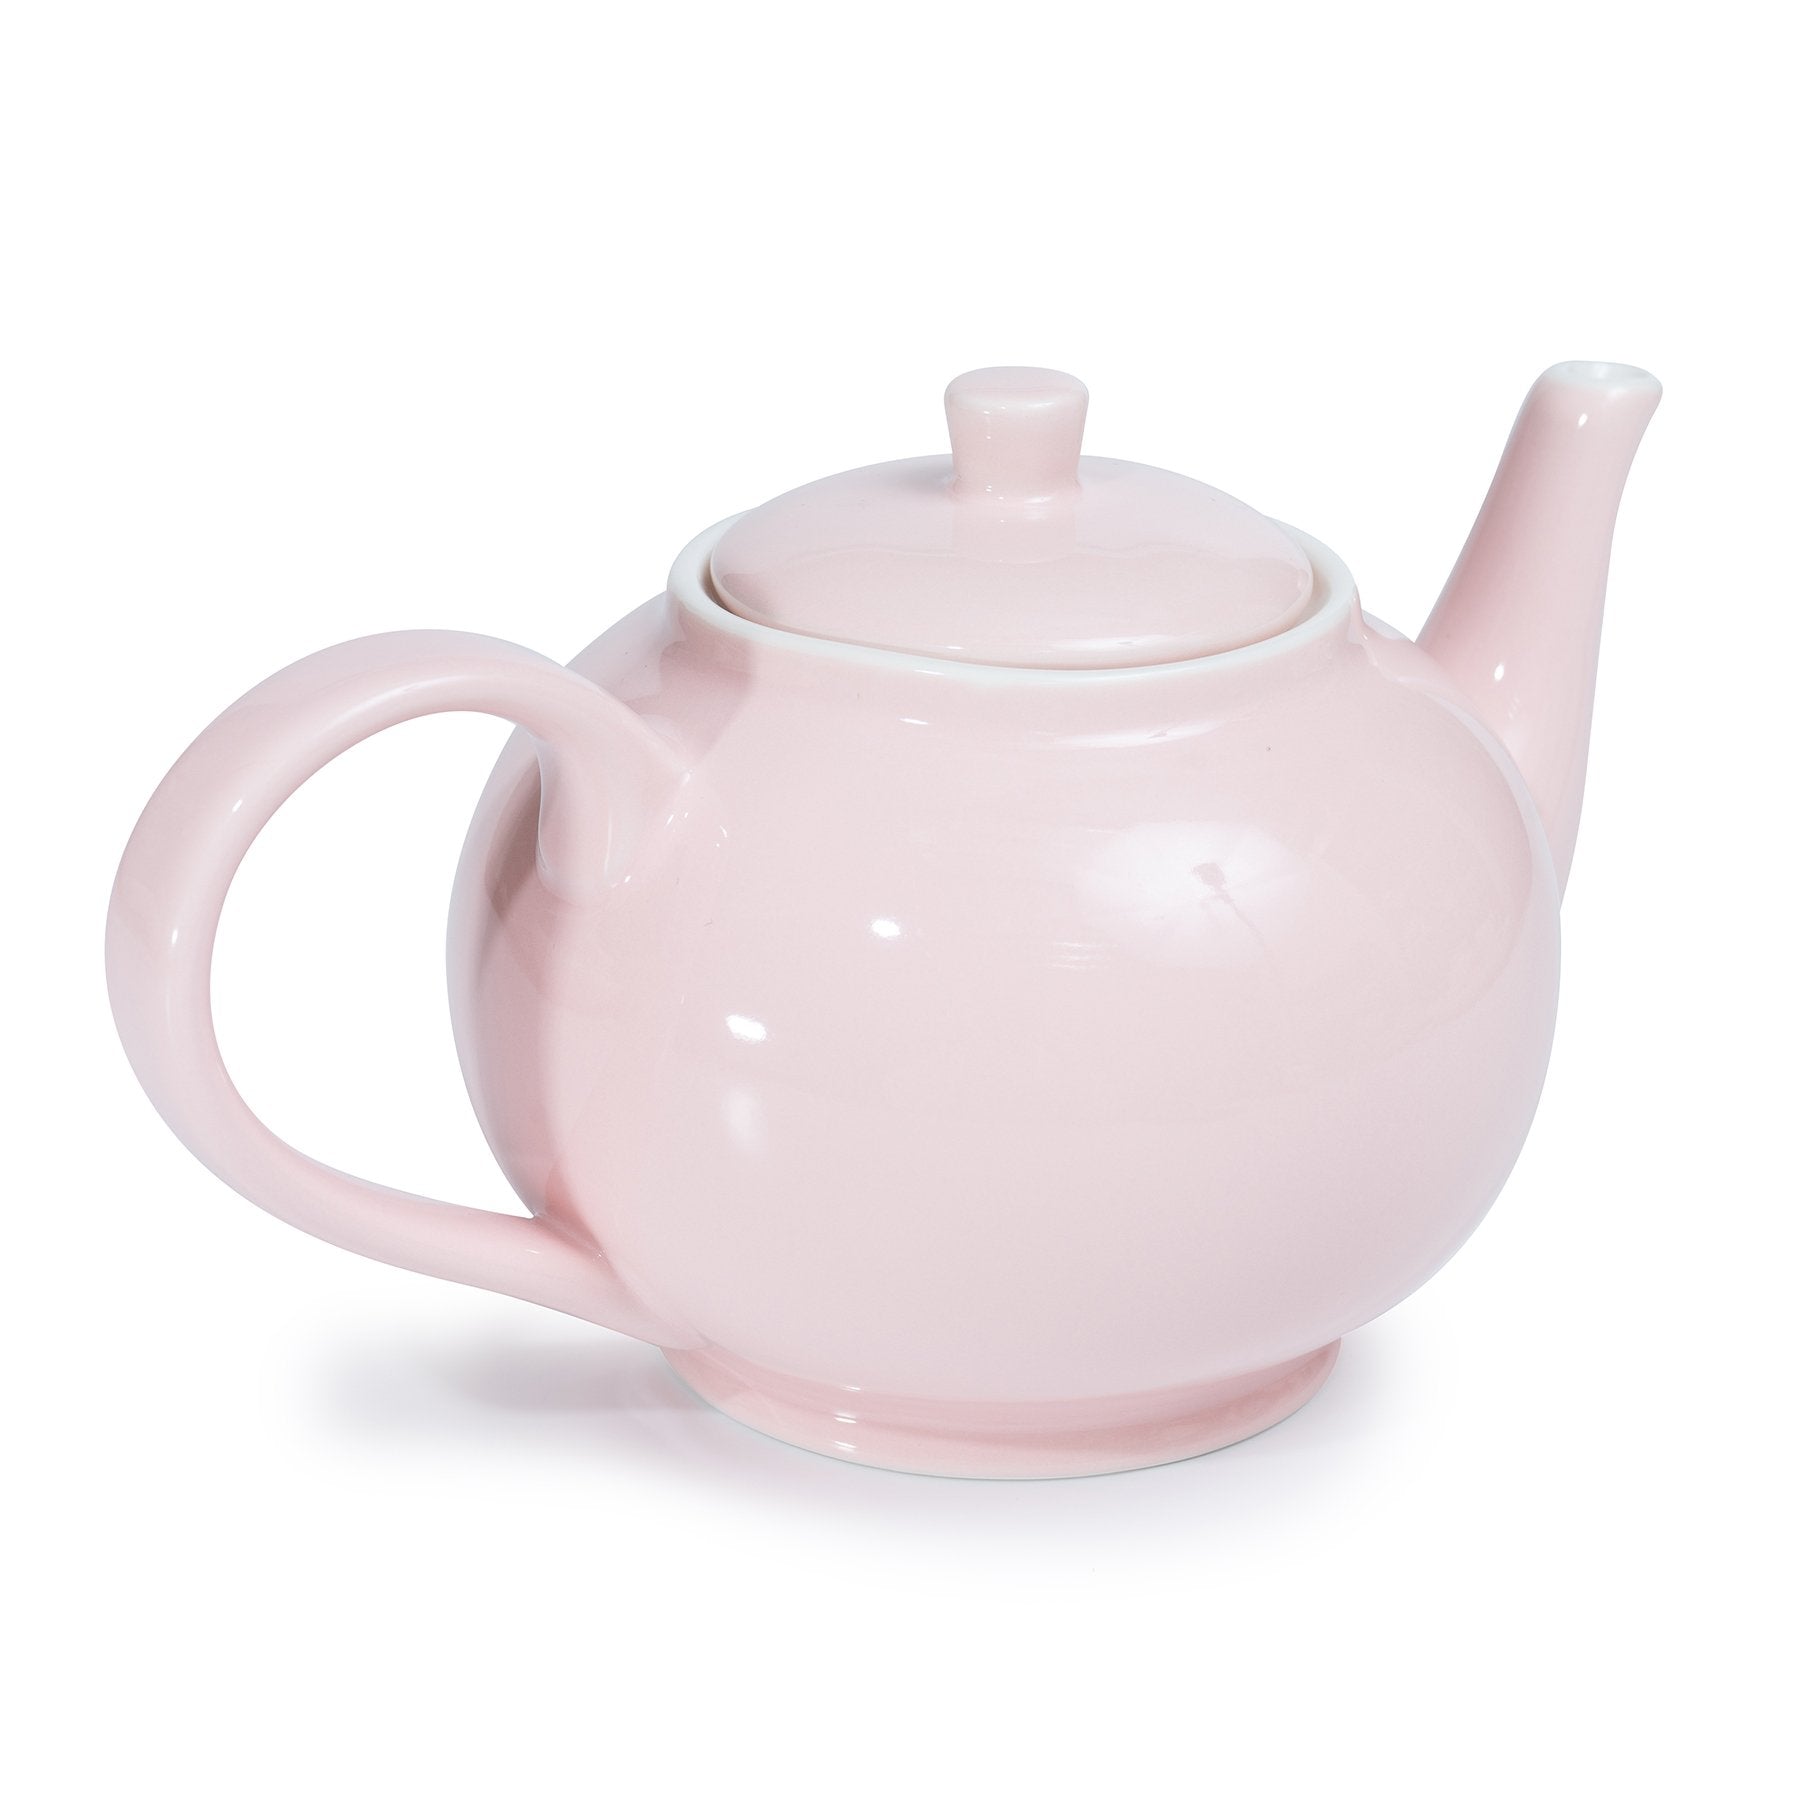 Cozy Pink by Don Bellini, Teapot